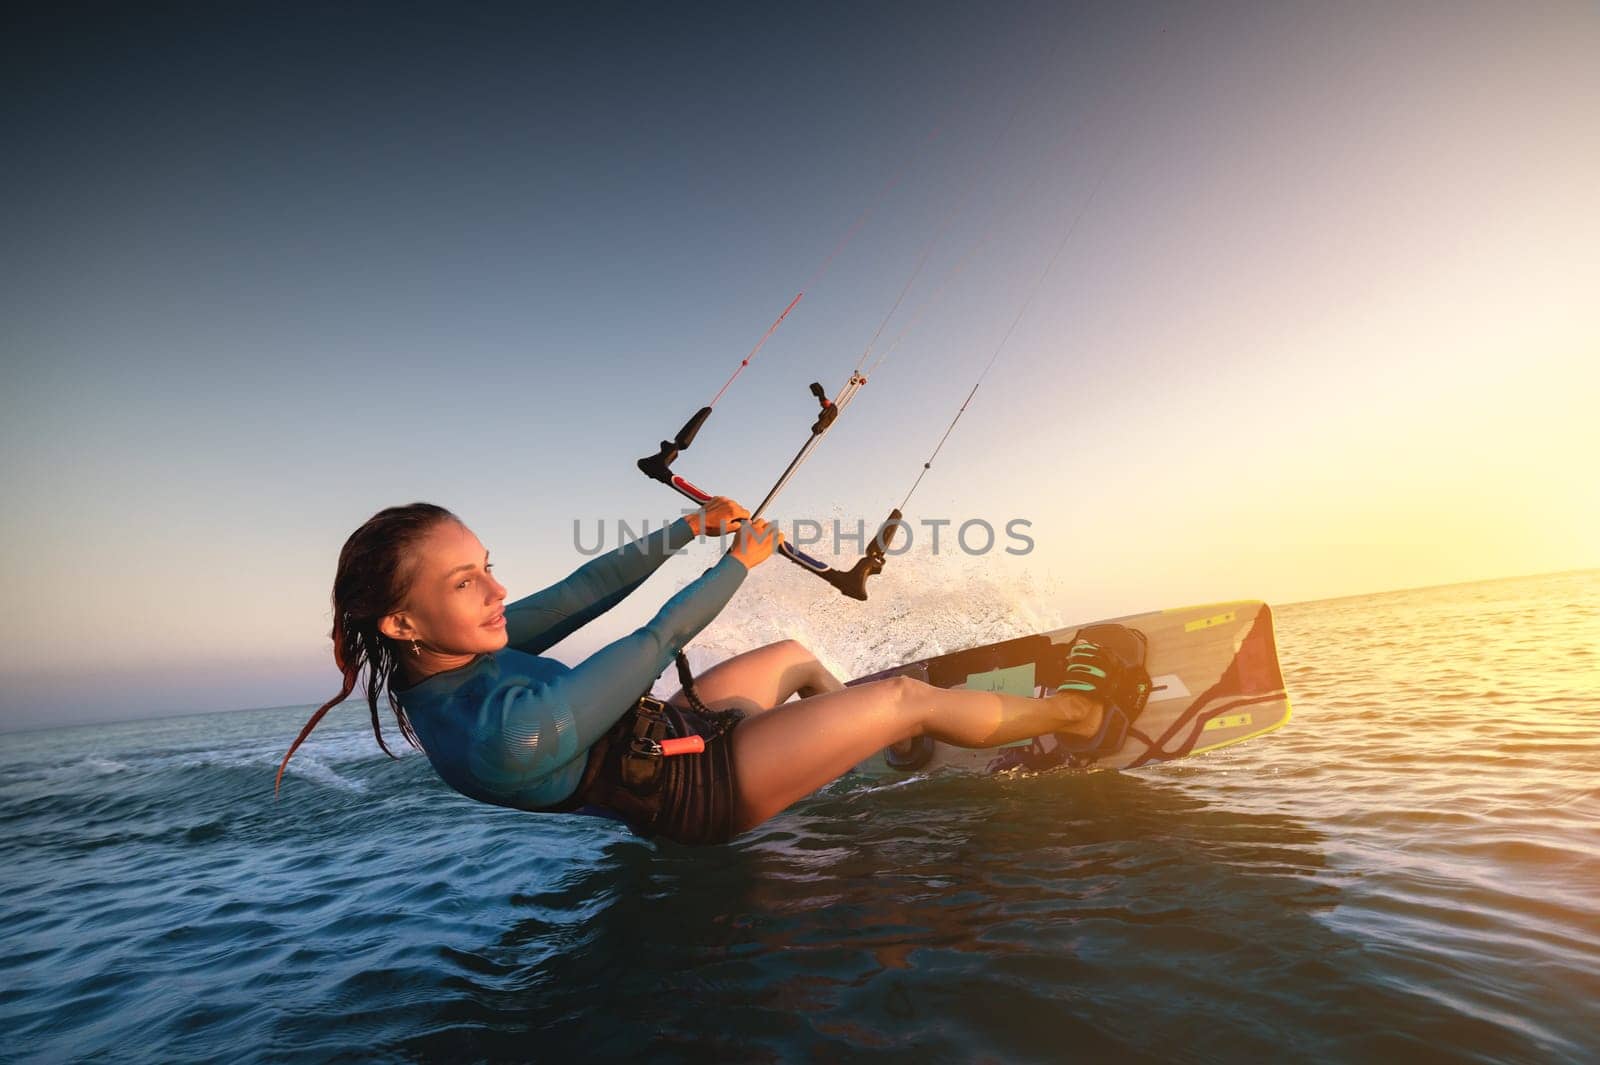 Girl kitesurfing in a sexy hydrosuit with a kite in the sky on board in the blue sea, riding on the water waves. Recreational activities, water sports, activities, hobbies and entertainment in the summer. Kiteboarding.